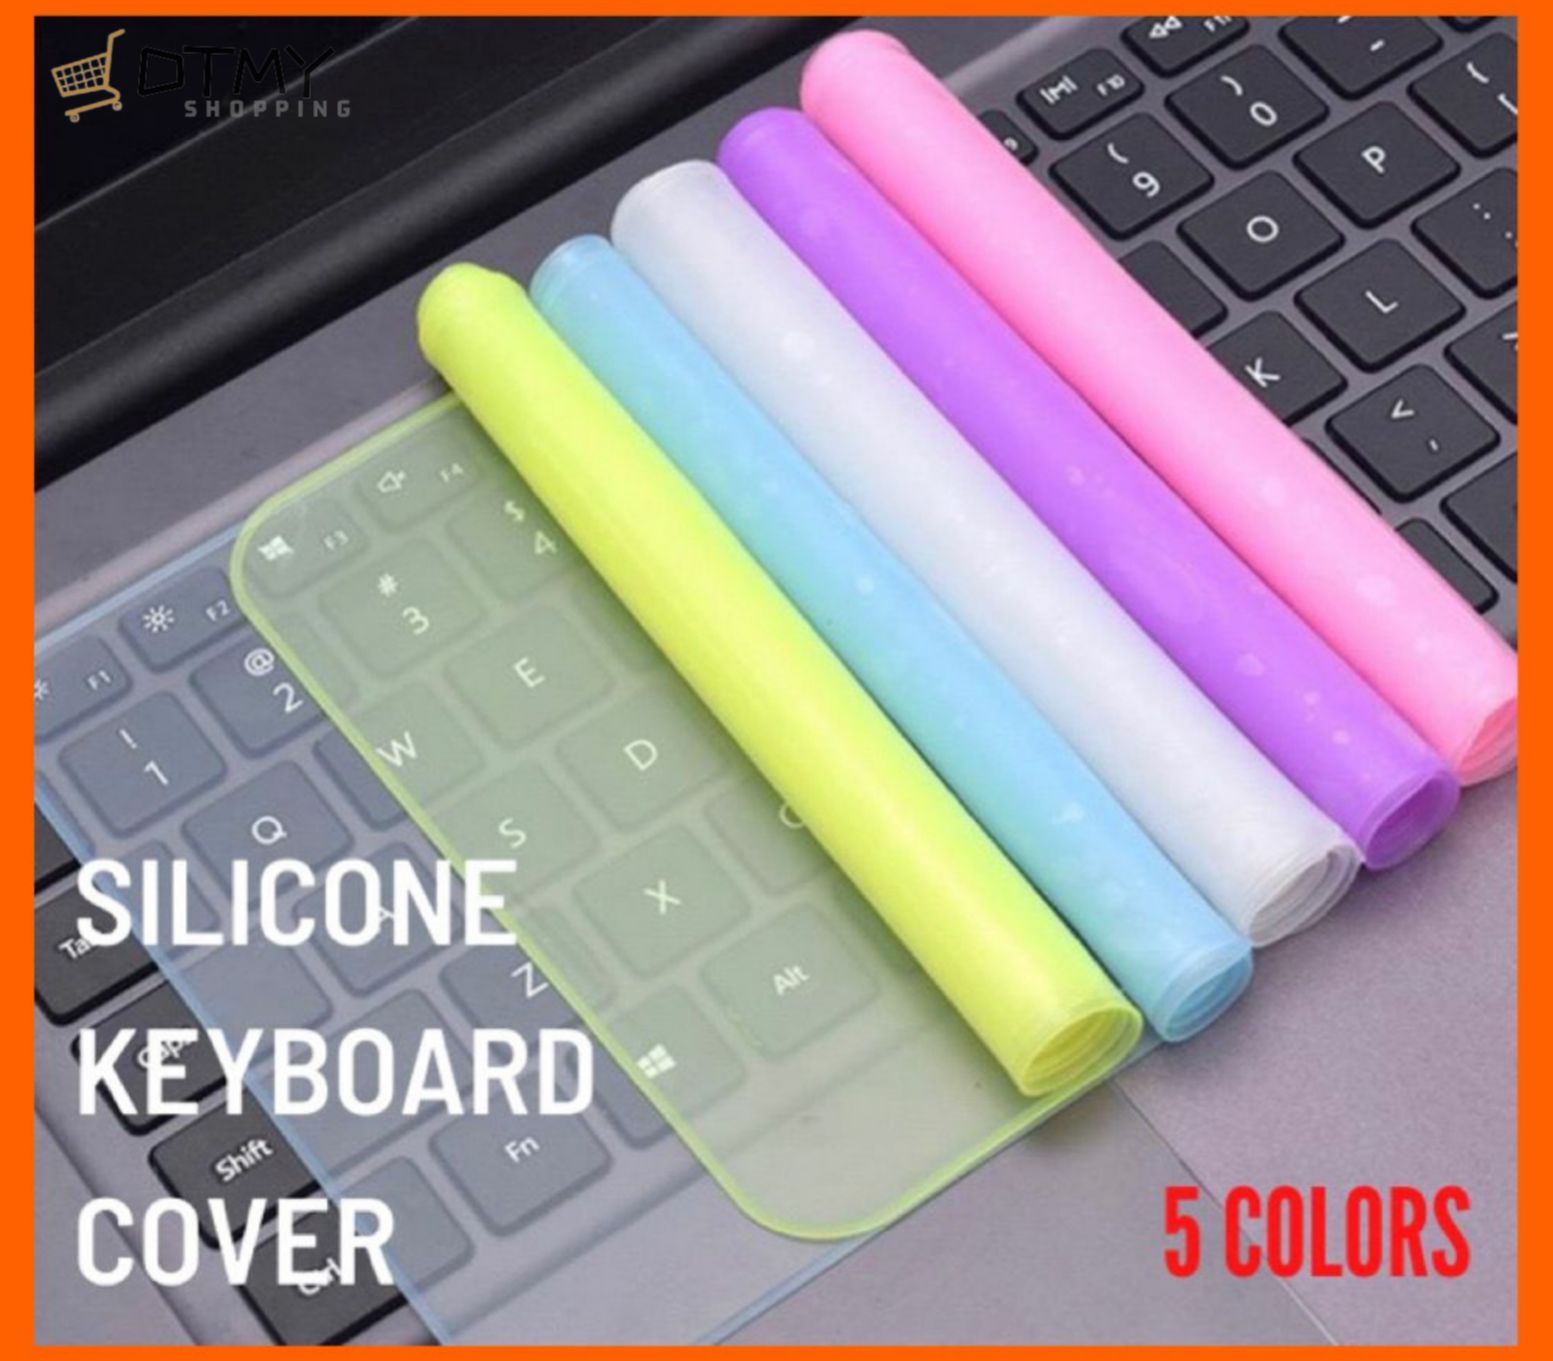 (11-17 inches) PREMIUM QUALITY Universal Silicone Keyboard Protector cover for Laptop pelapik papan kekunci Laptop silicone protective keyboard film